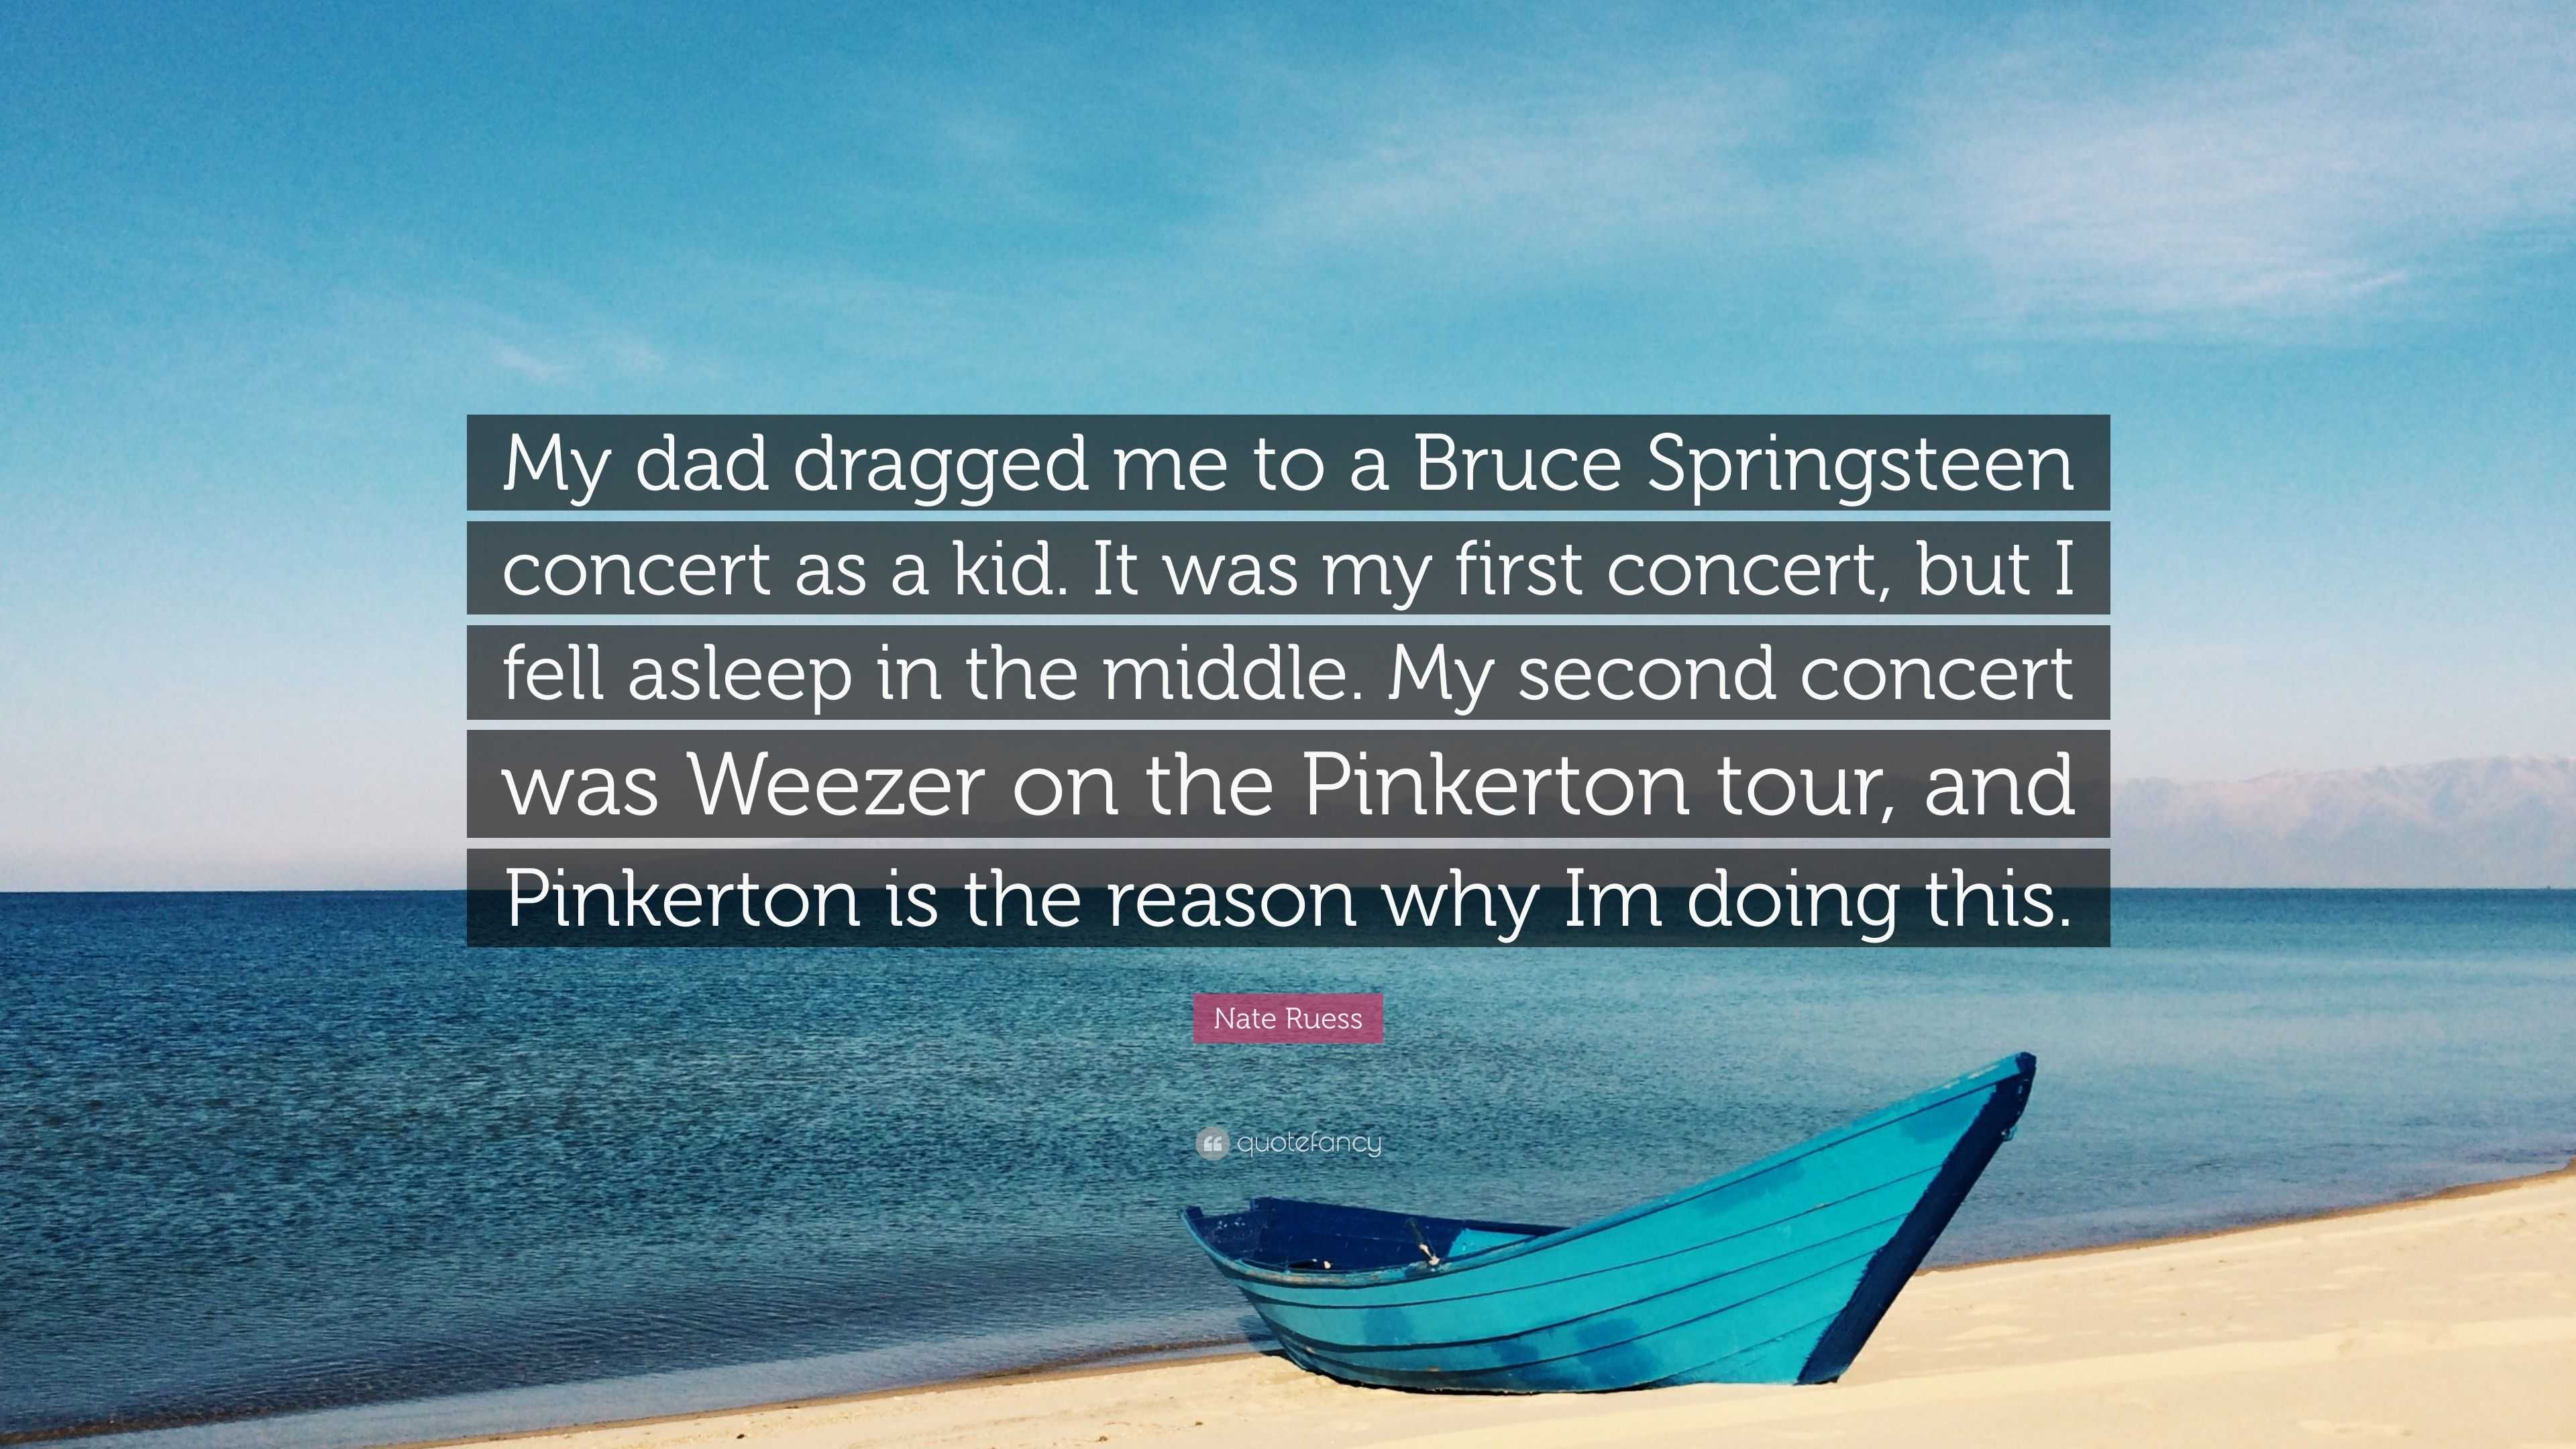 Nate Ruess Quote: “My dad dragged me to a Bruce Springsteen concert as a  kid. It was my first concert, but I fell asleep in the middle. My ”